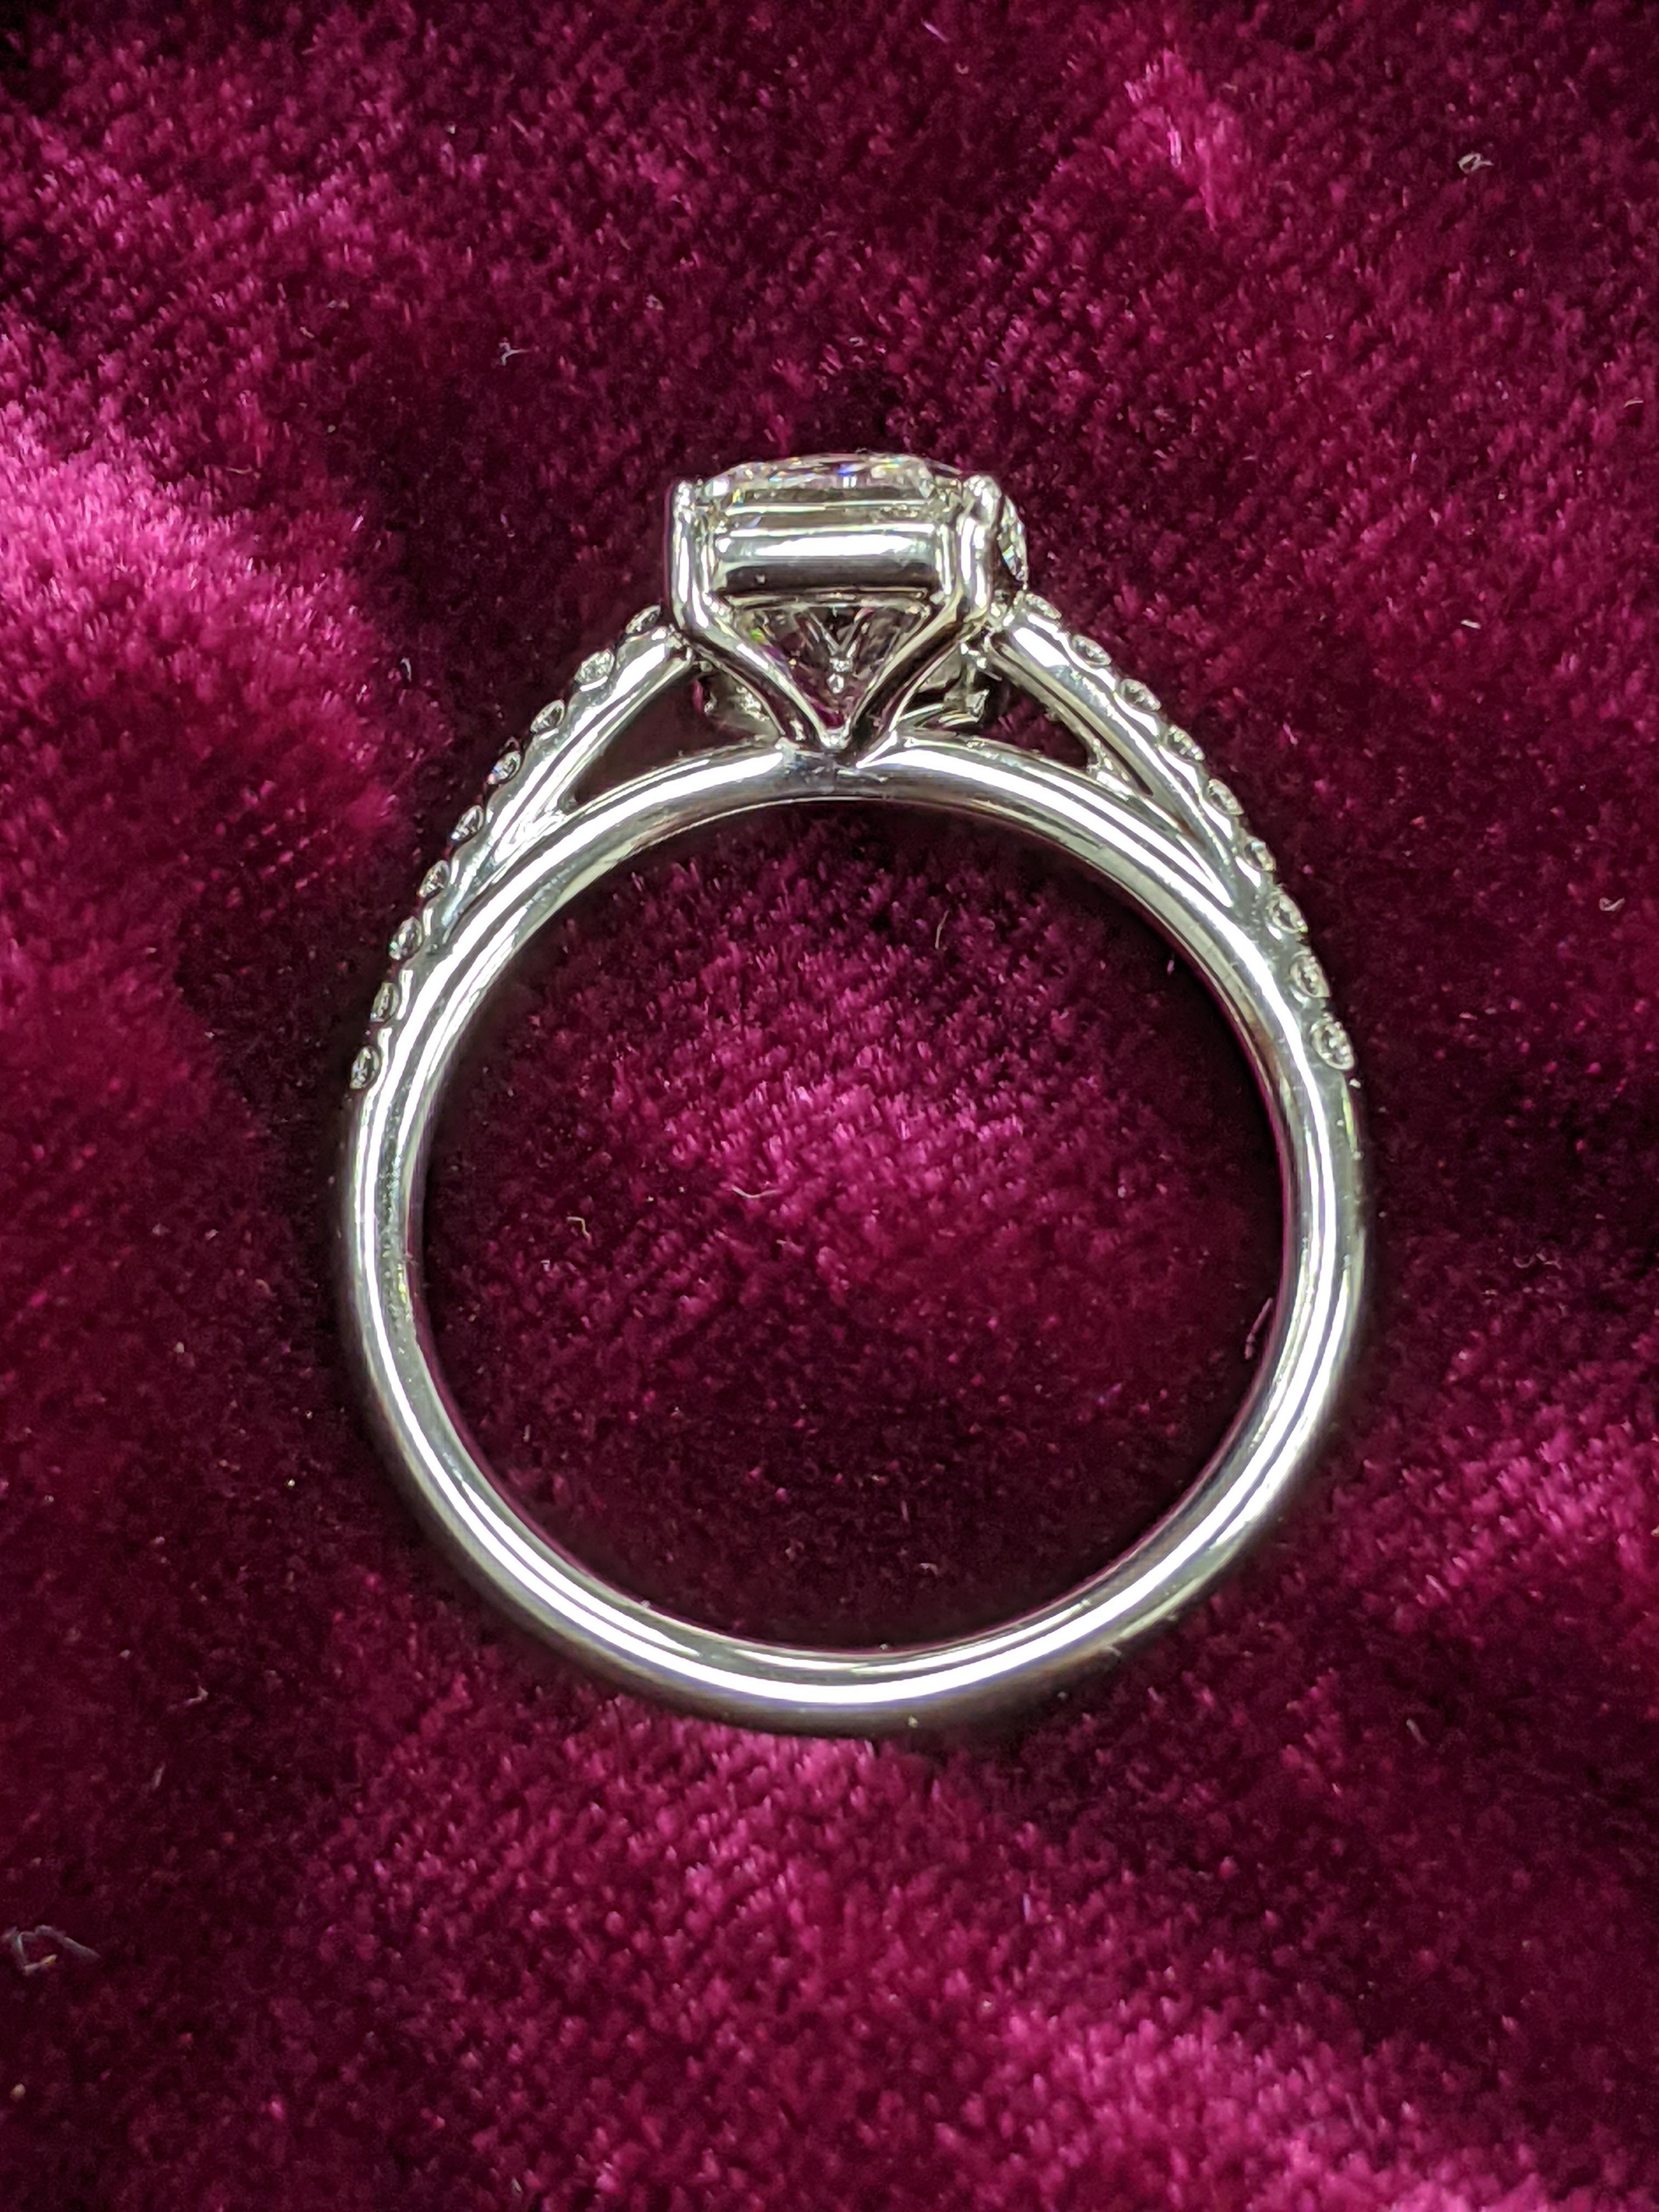 2.03 ct Cushion Modified Brilliant with G color and VVS-1 clarity (GIA certificate upon request) mounted on an 18KT white gold solitaire-style mounting.  18 small diamonds (0.14 ct) stud the front of the mounting.

Crafted in the heart of NYC's